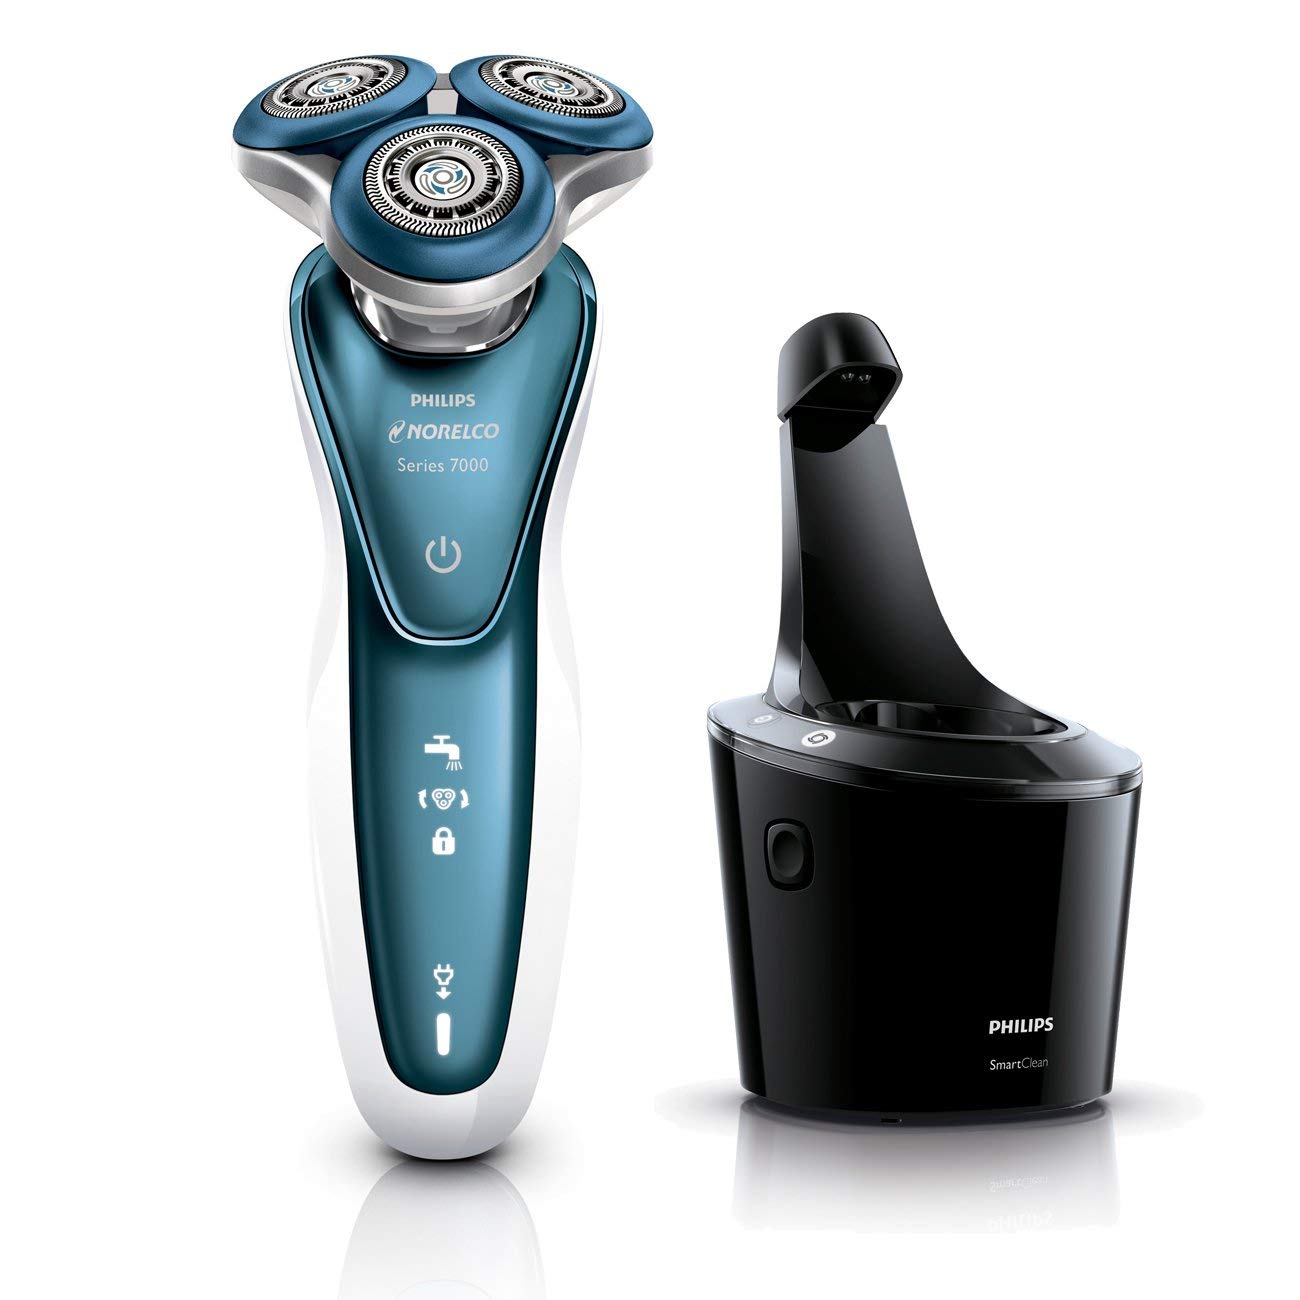 Philips Norelco 7300 Anti-Friction Electric Razor